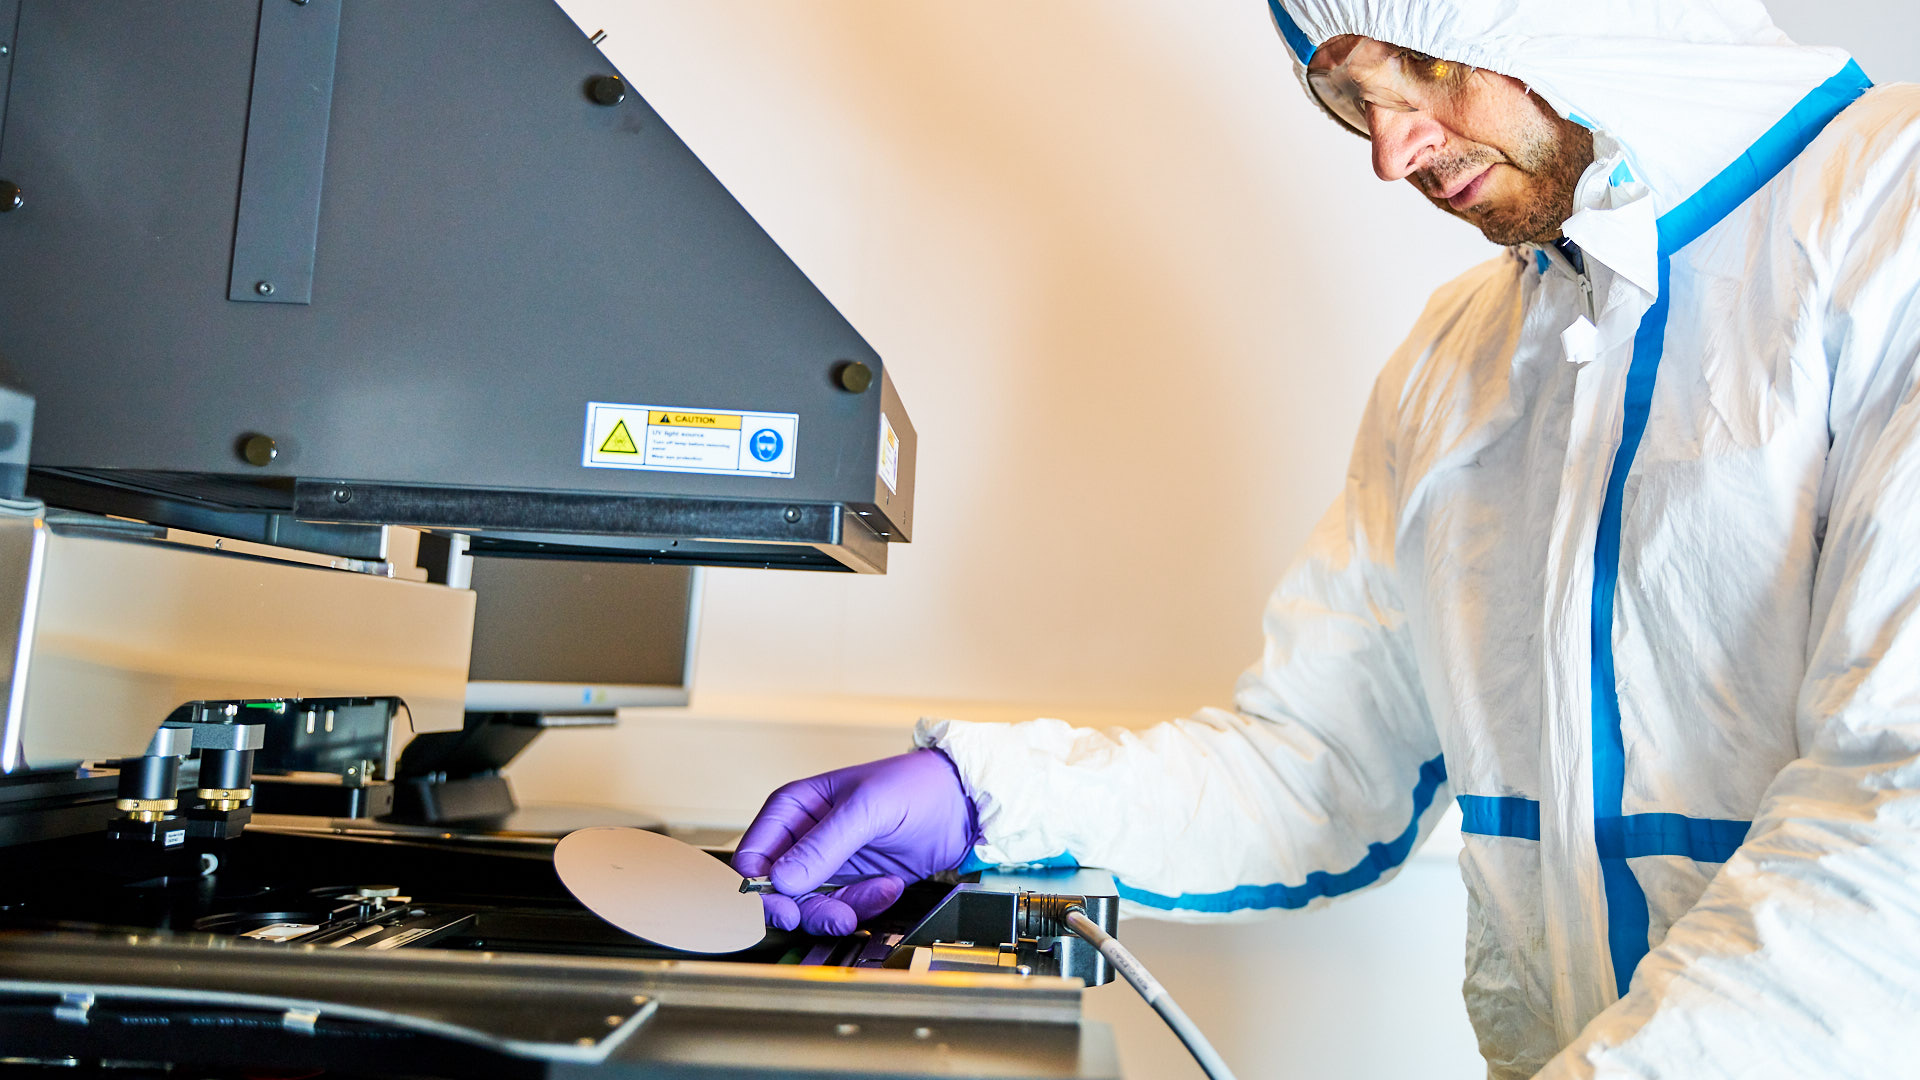 Researcher working the nanoimprint Lithography system at the University of Bath